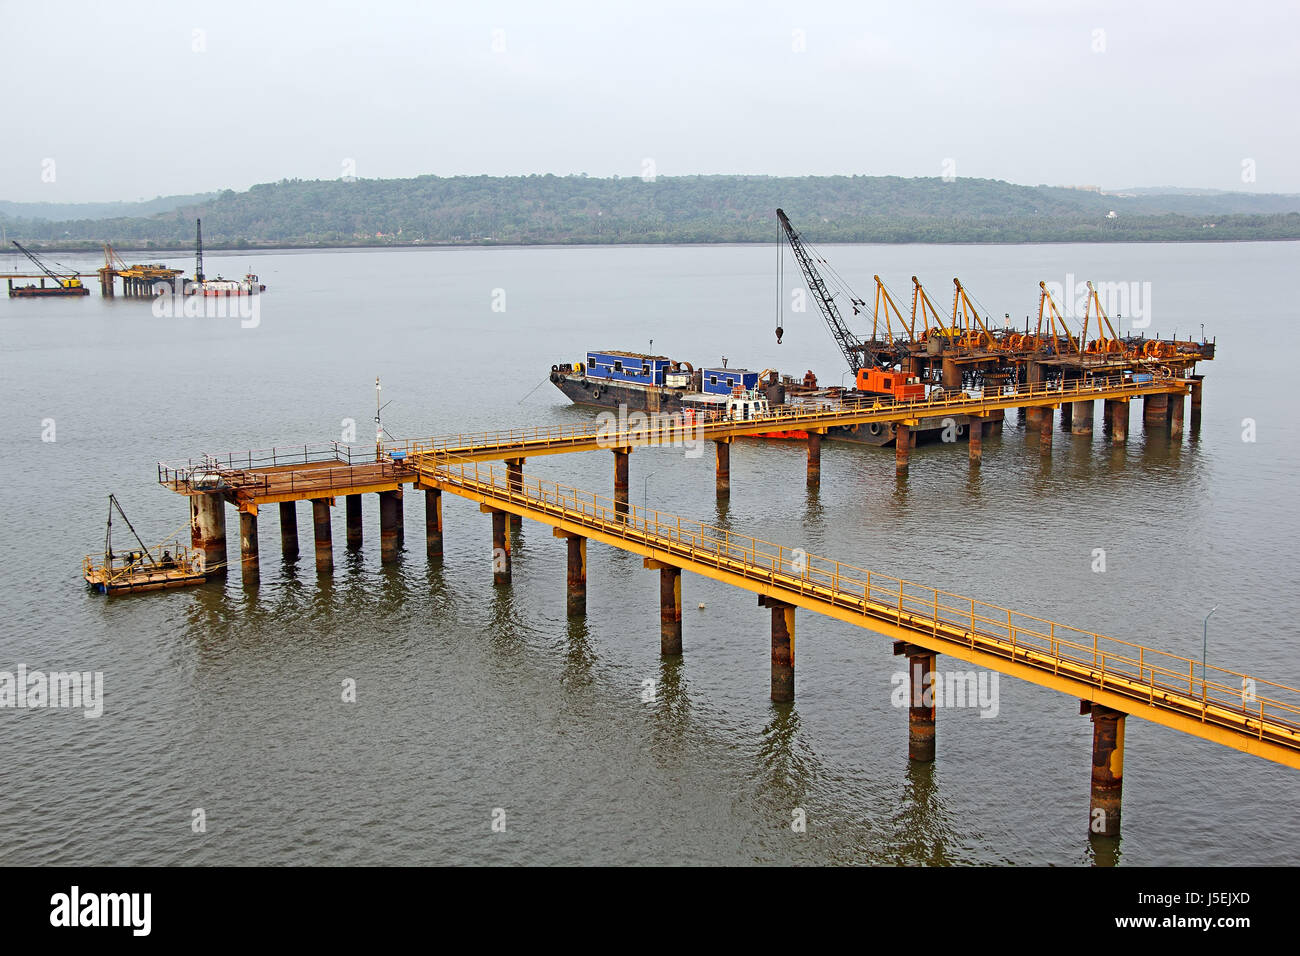 Foundation work for marine structure in full swing in Zuari River in Goa, India Stock Photo